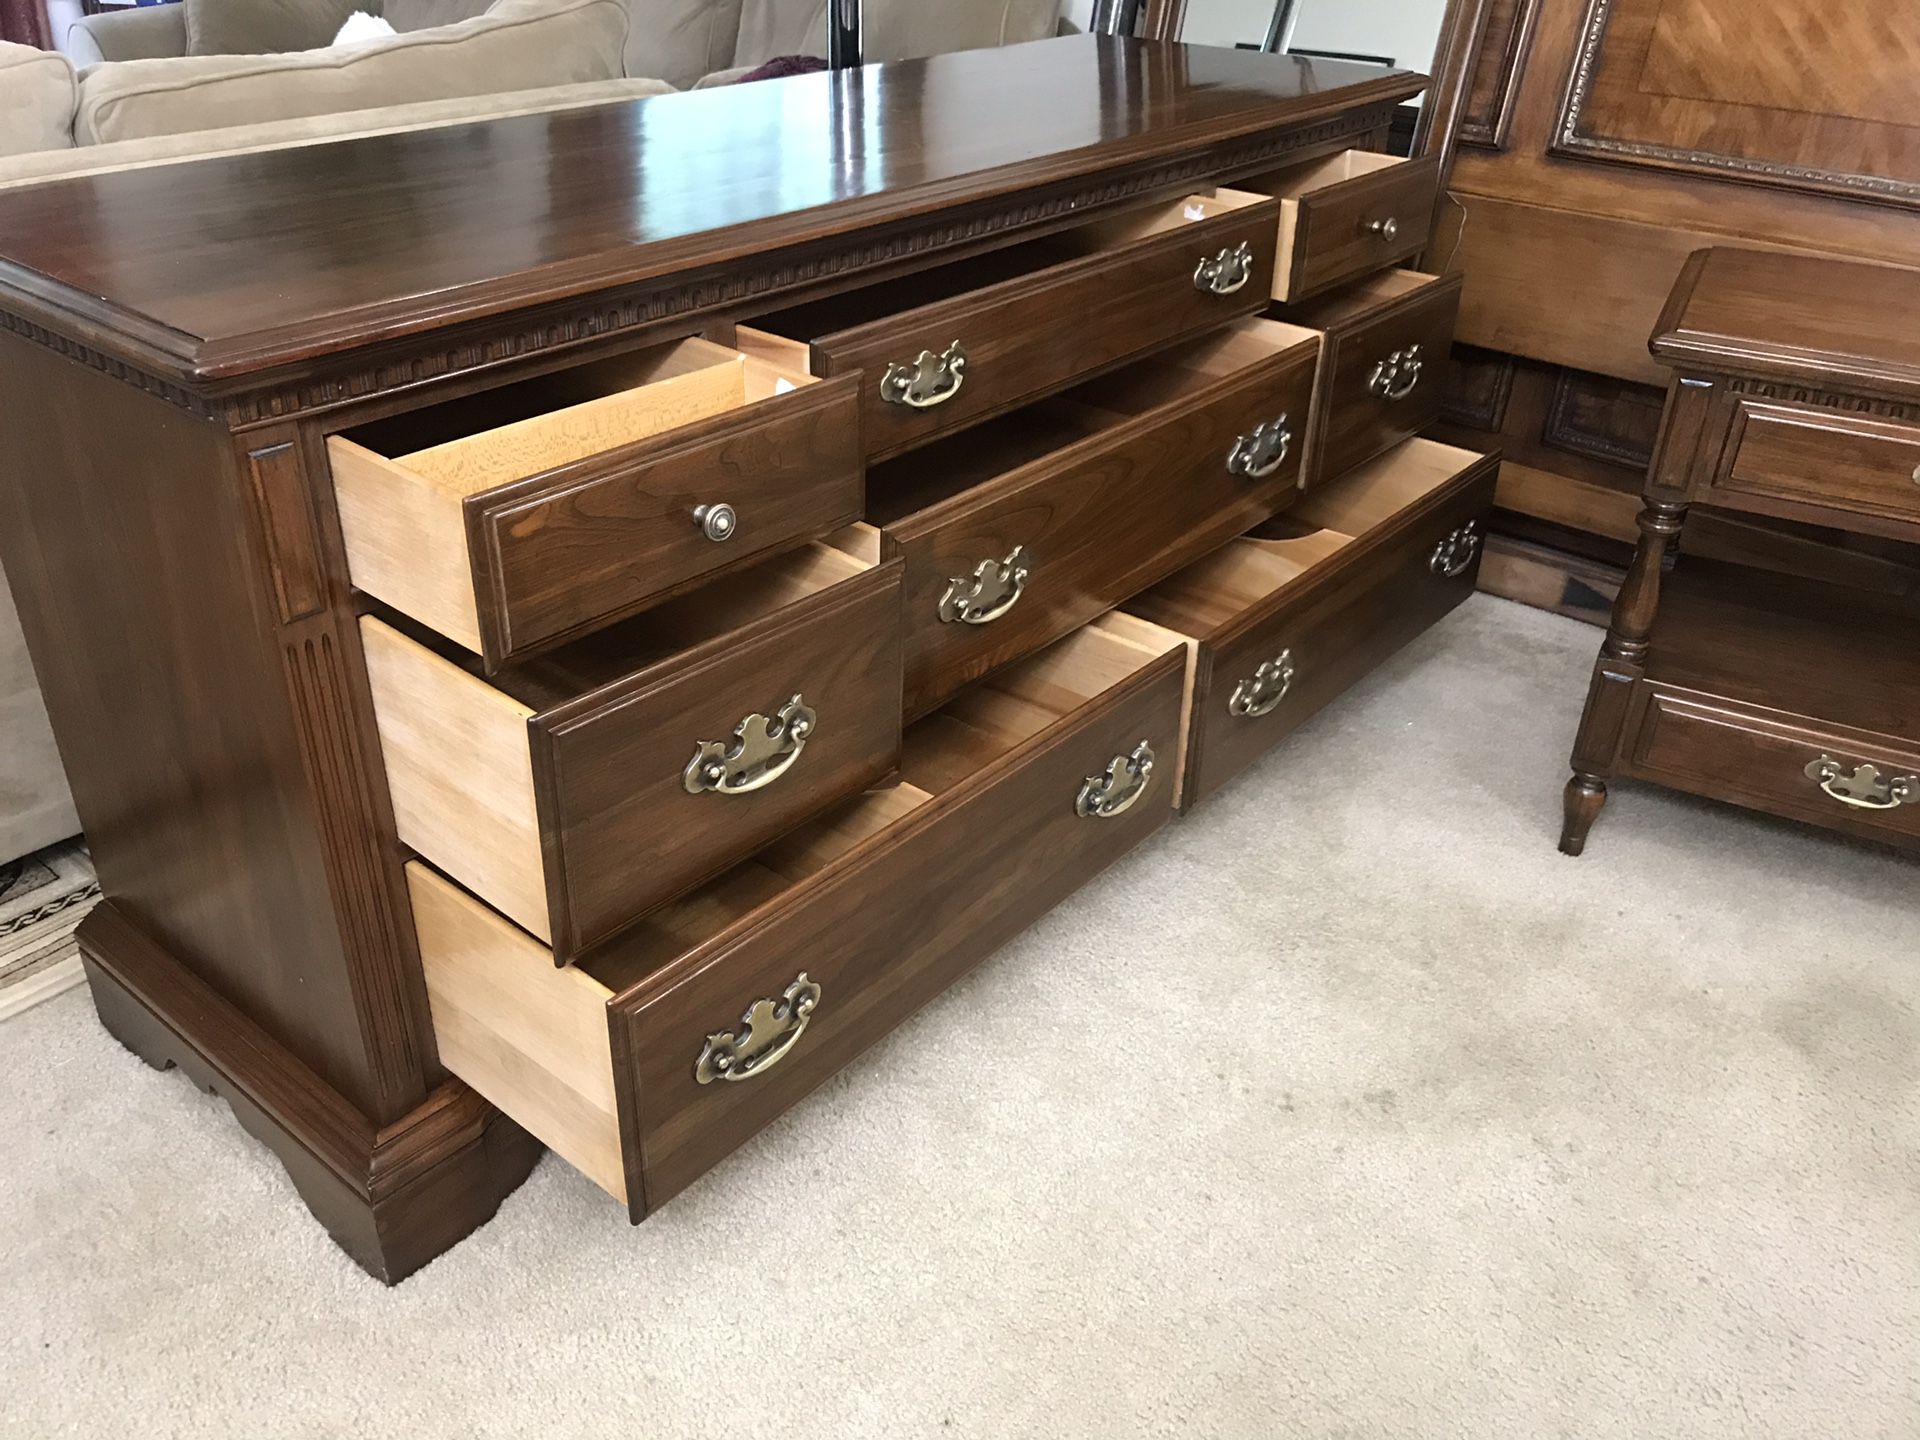 8-drawers long dresser with mirror